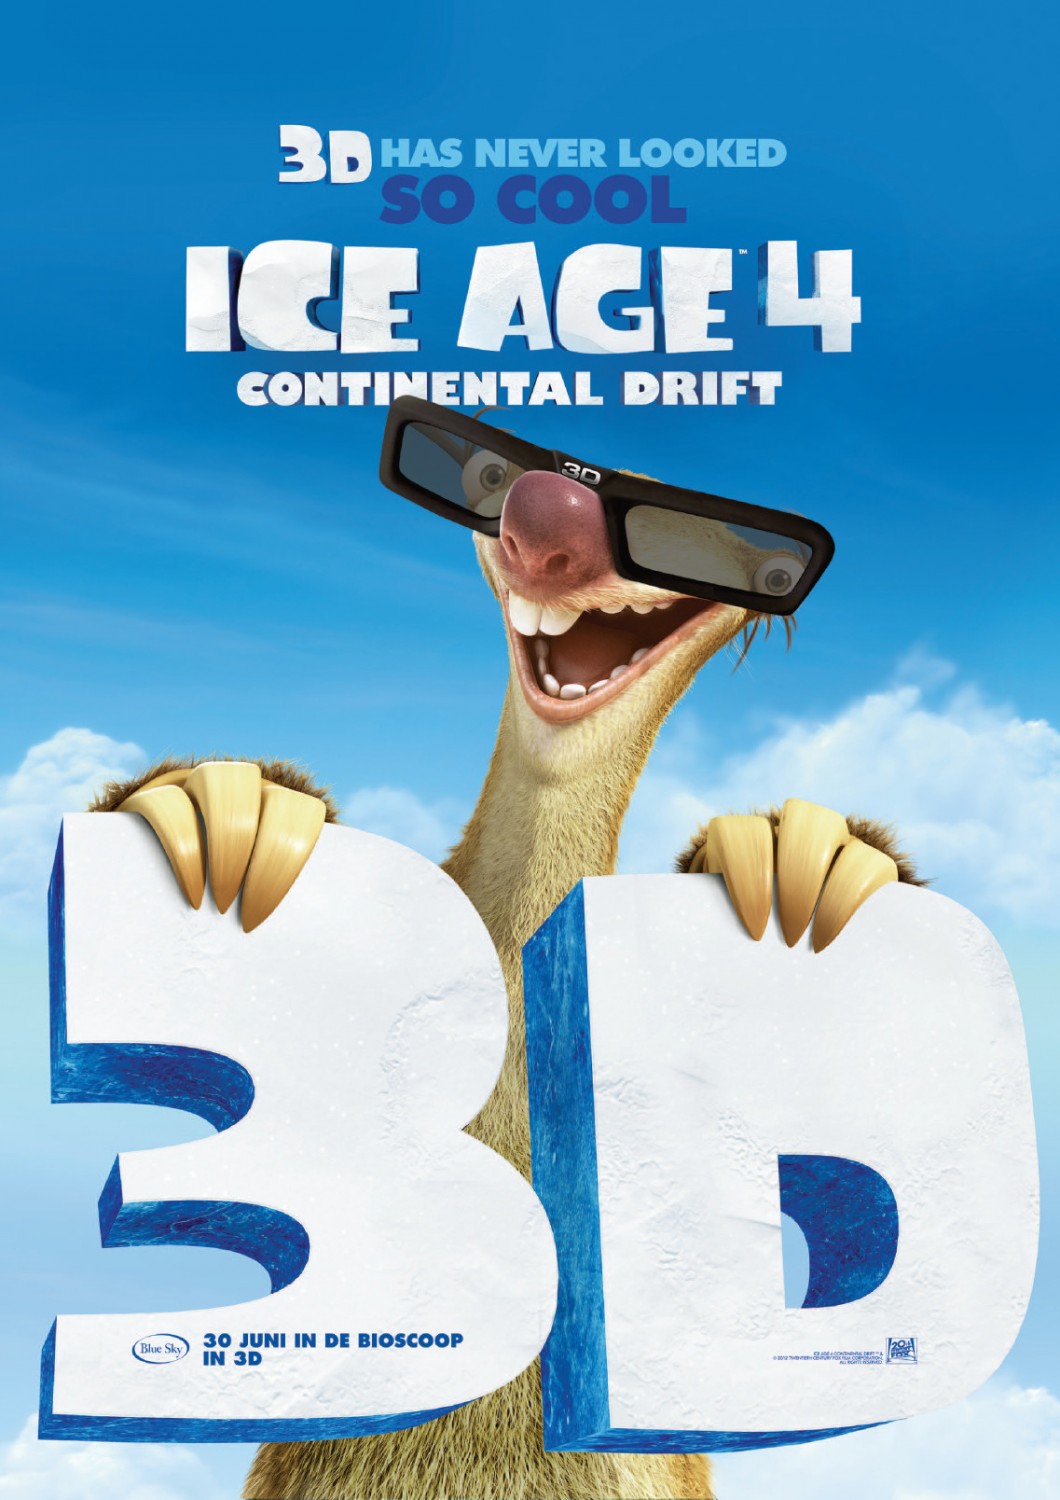 ice age continental drift movie poster